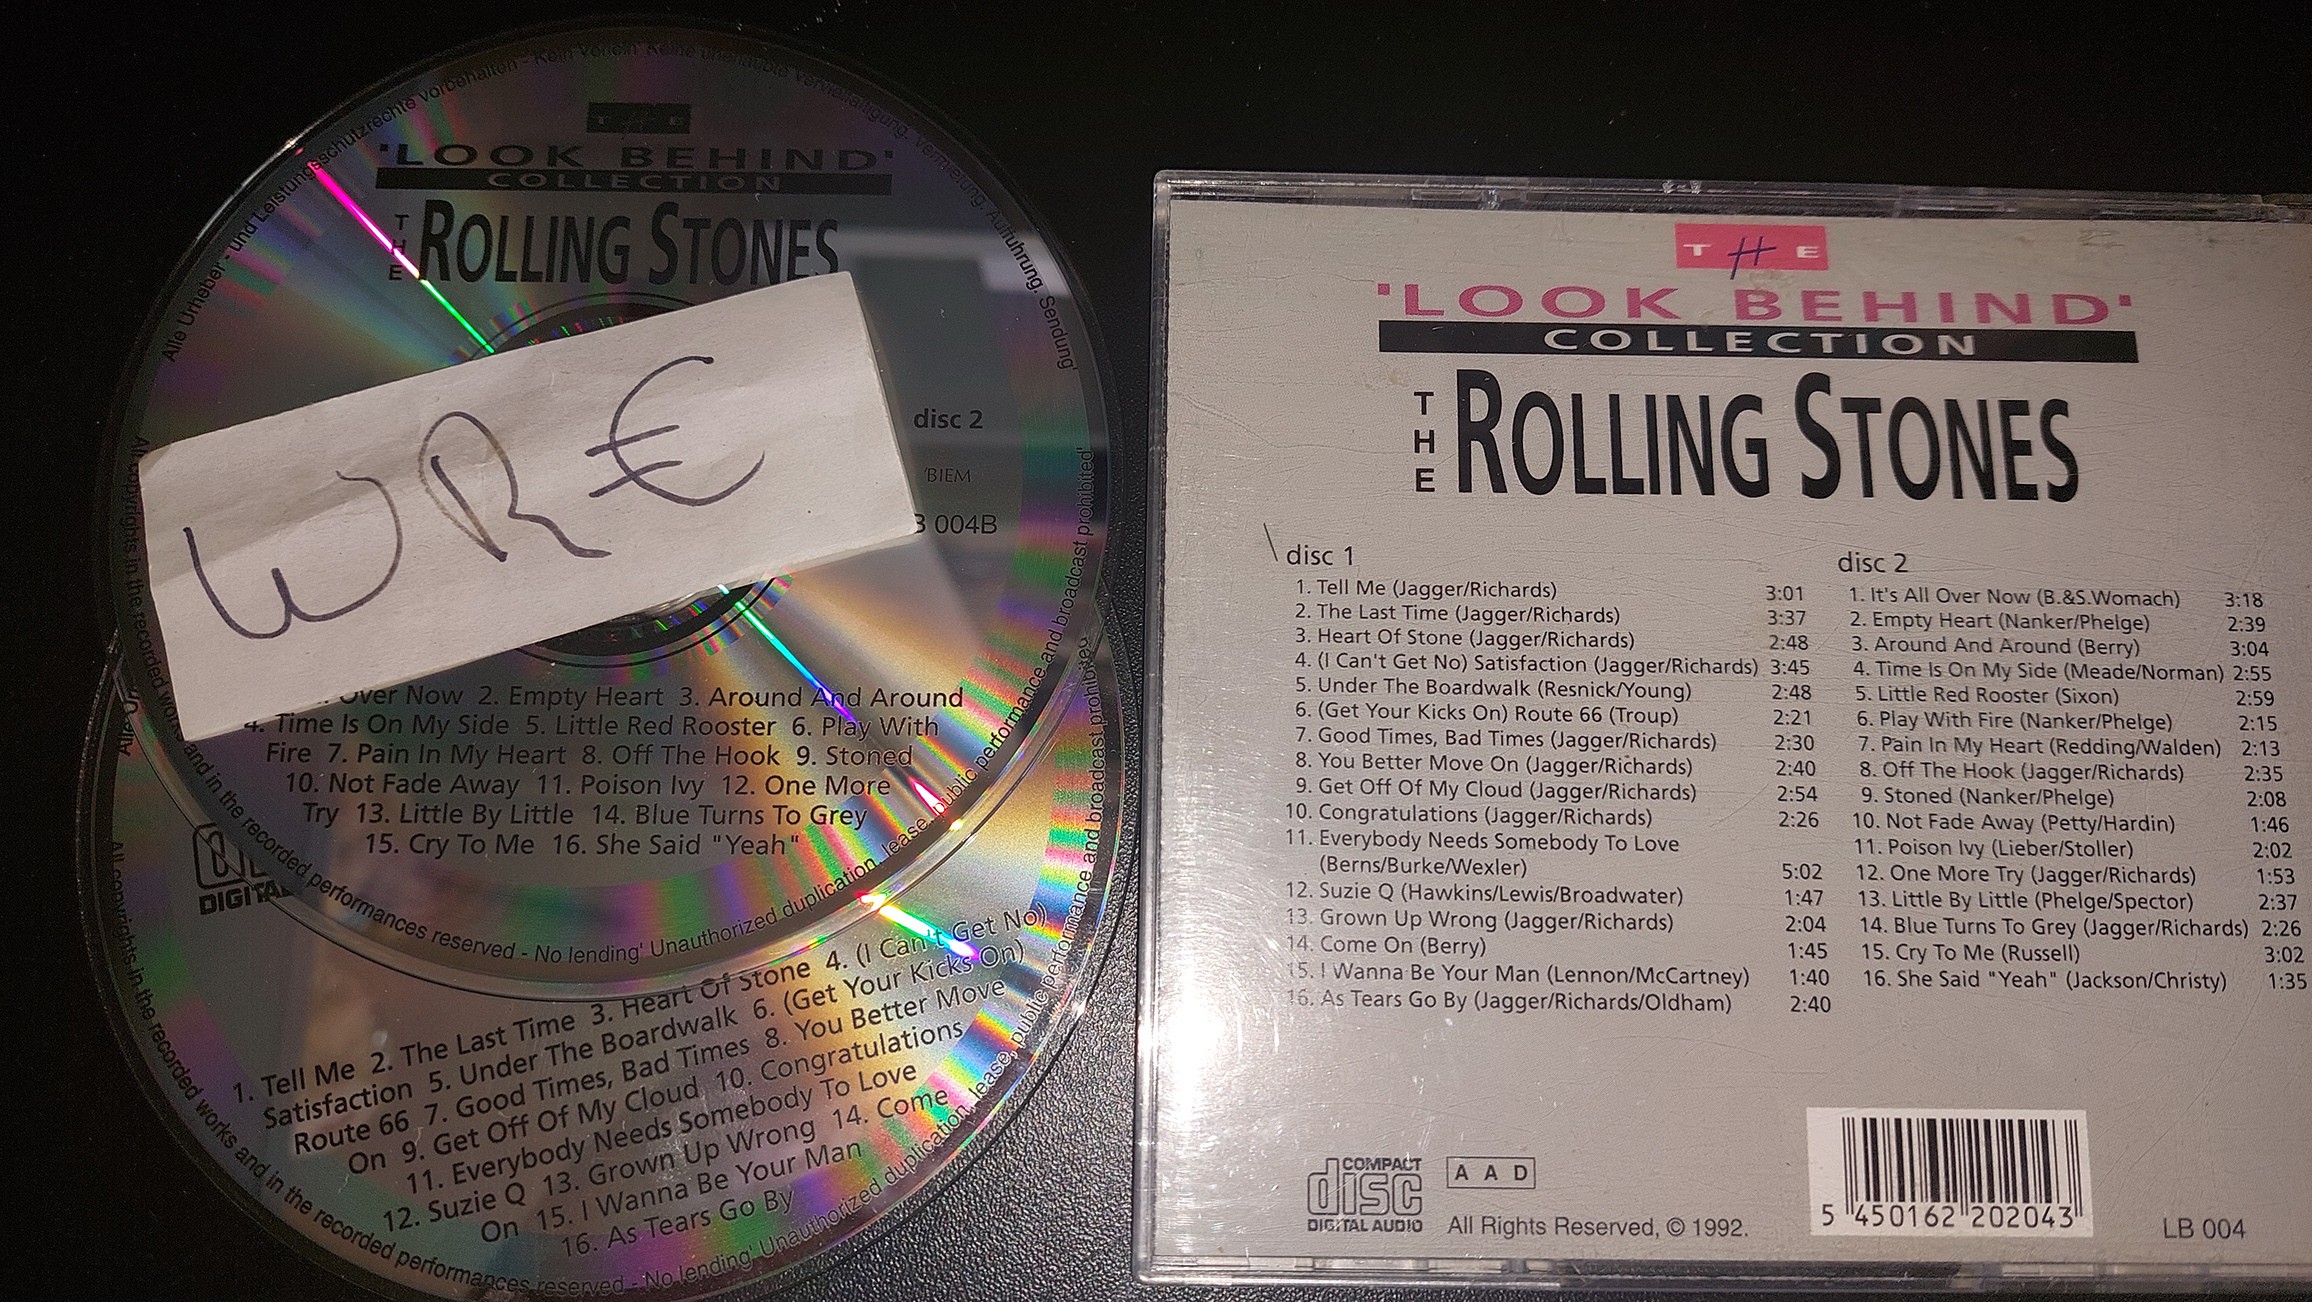 The Rolling Stones-The Look Behind Collection-(LB 004)-2CD-FLAC-1992-WRE